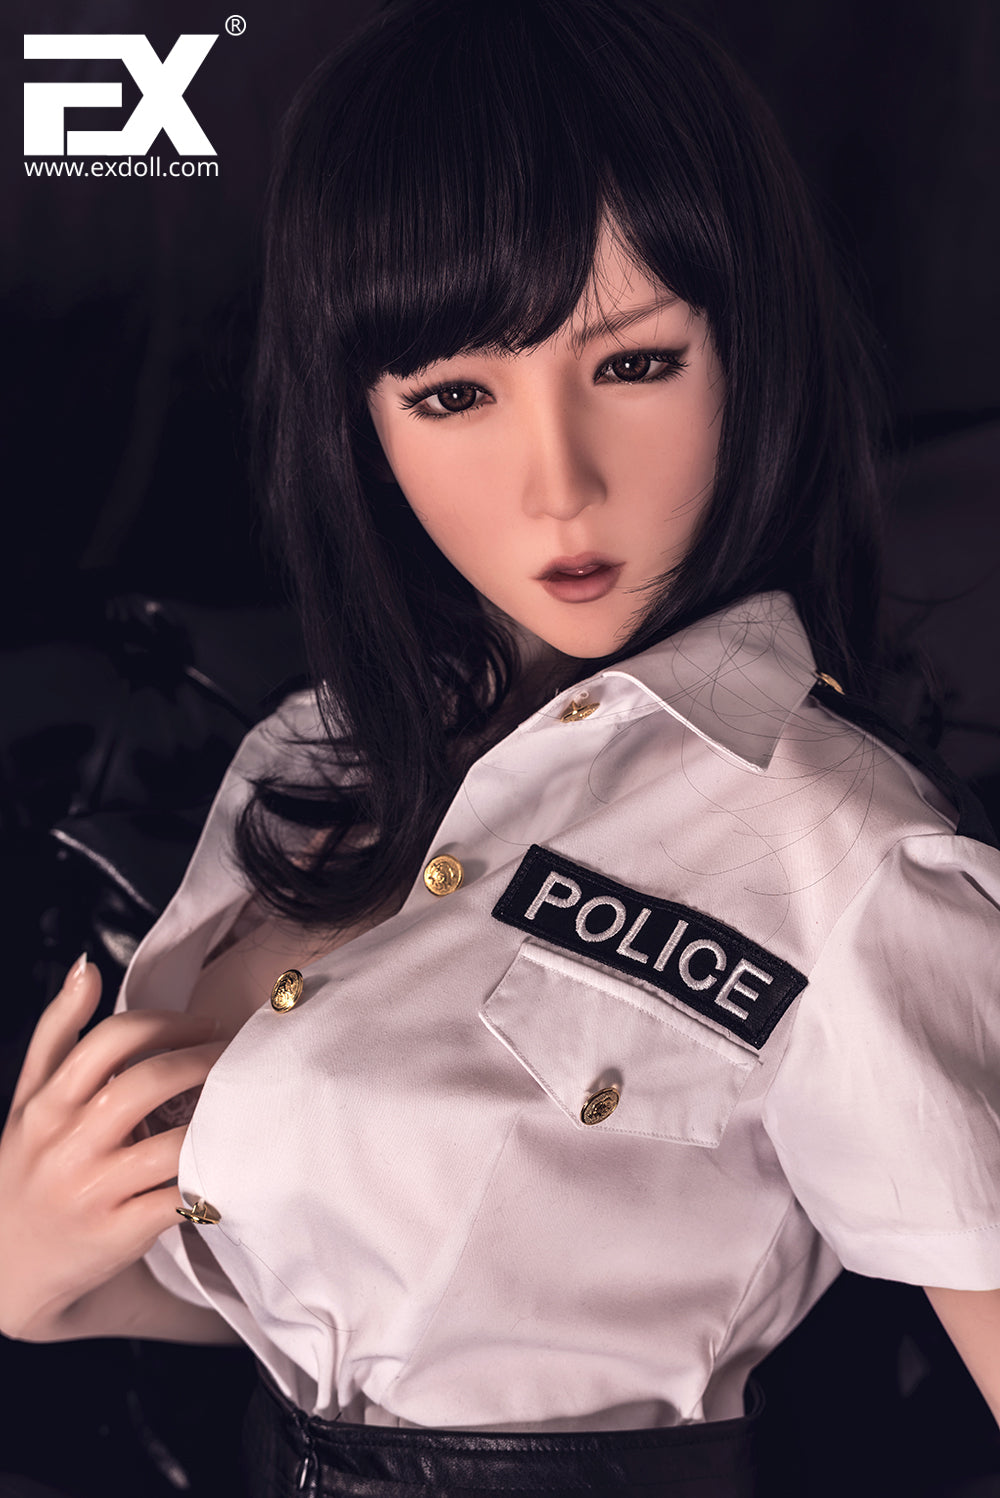 EX Doll Ukiyoe Series 170 cm Silicone - Seung Hee | Sex Dolls SG